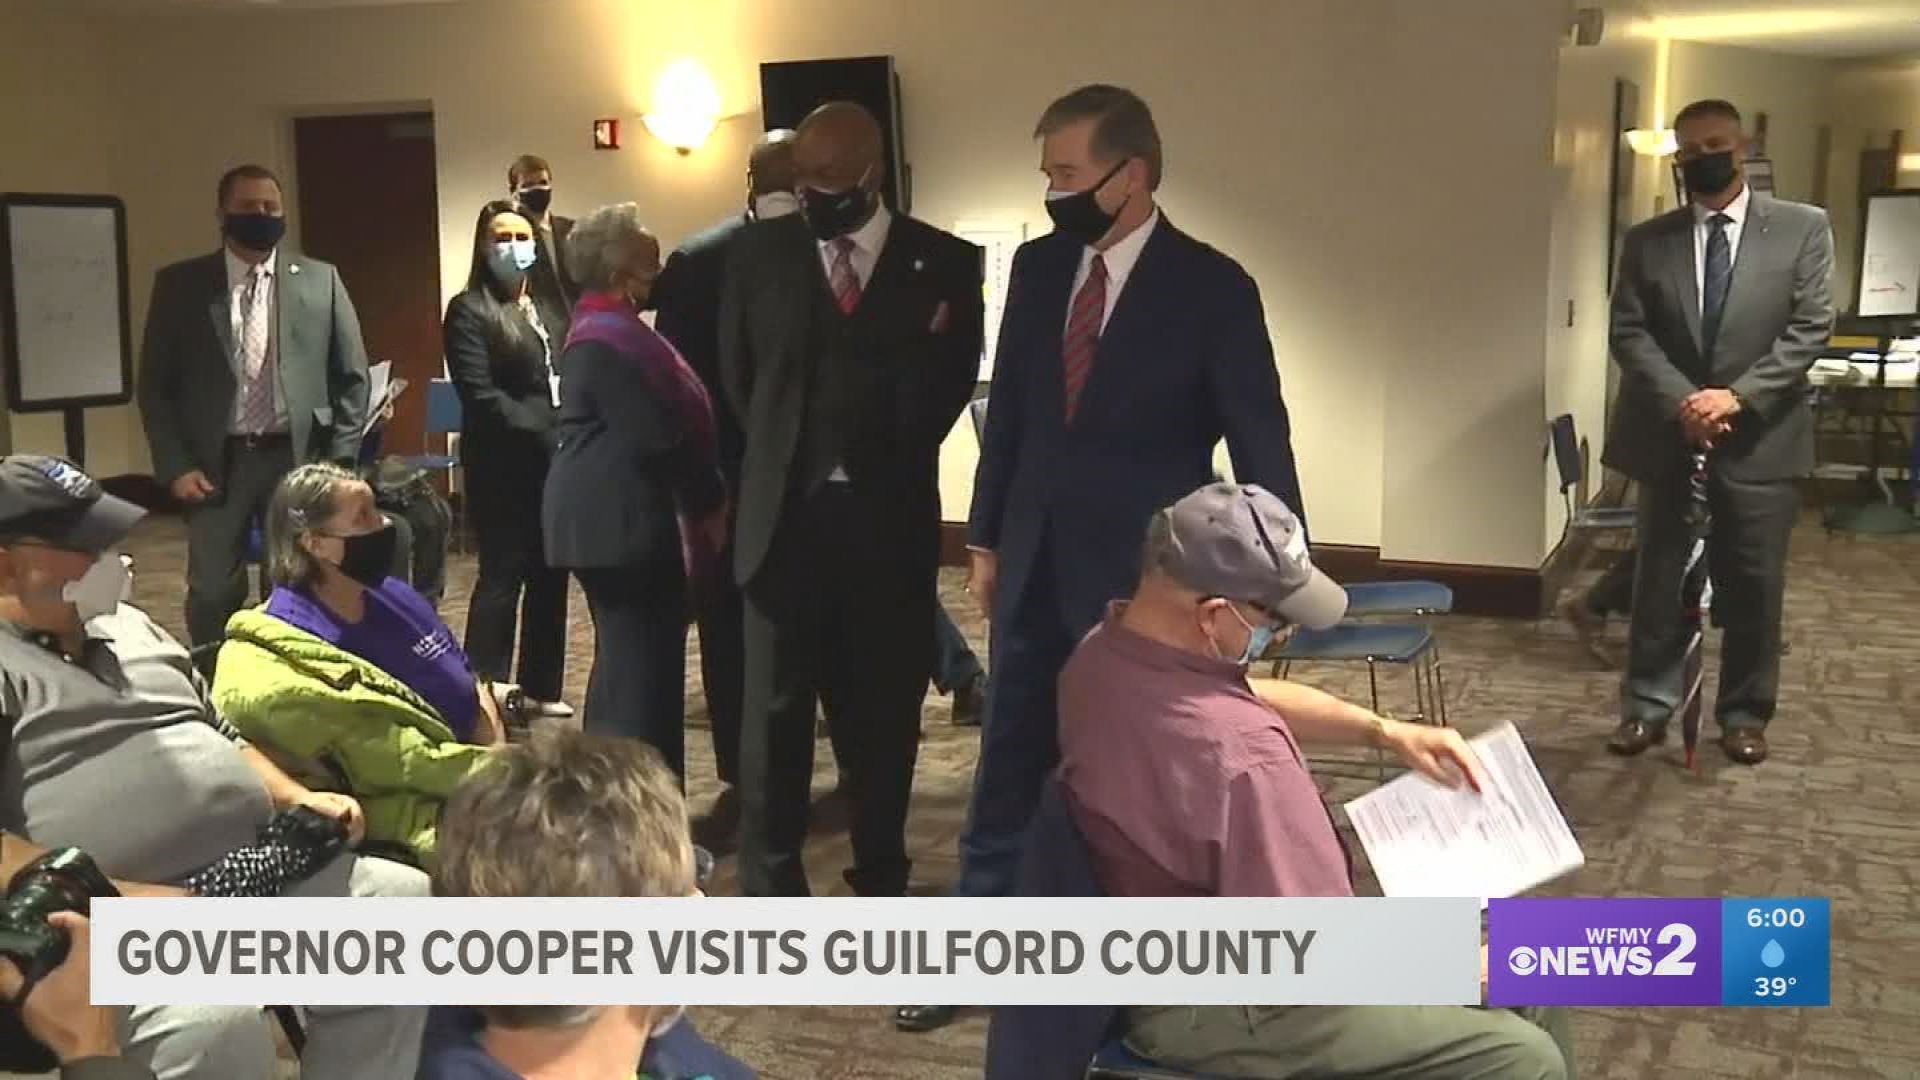 Gov. Roy Cooper toured a COVID-19 vaccine clinic at Mount Zion Baptist Church to see how Guilford County leaders are distributing vaccines to underserved communities